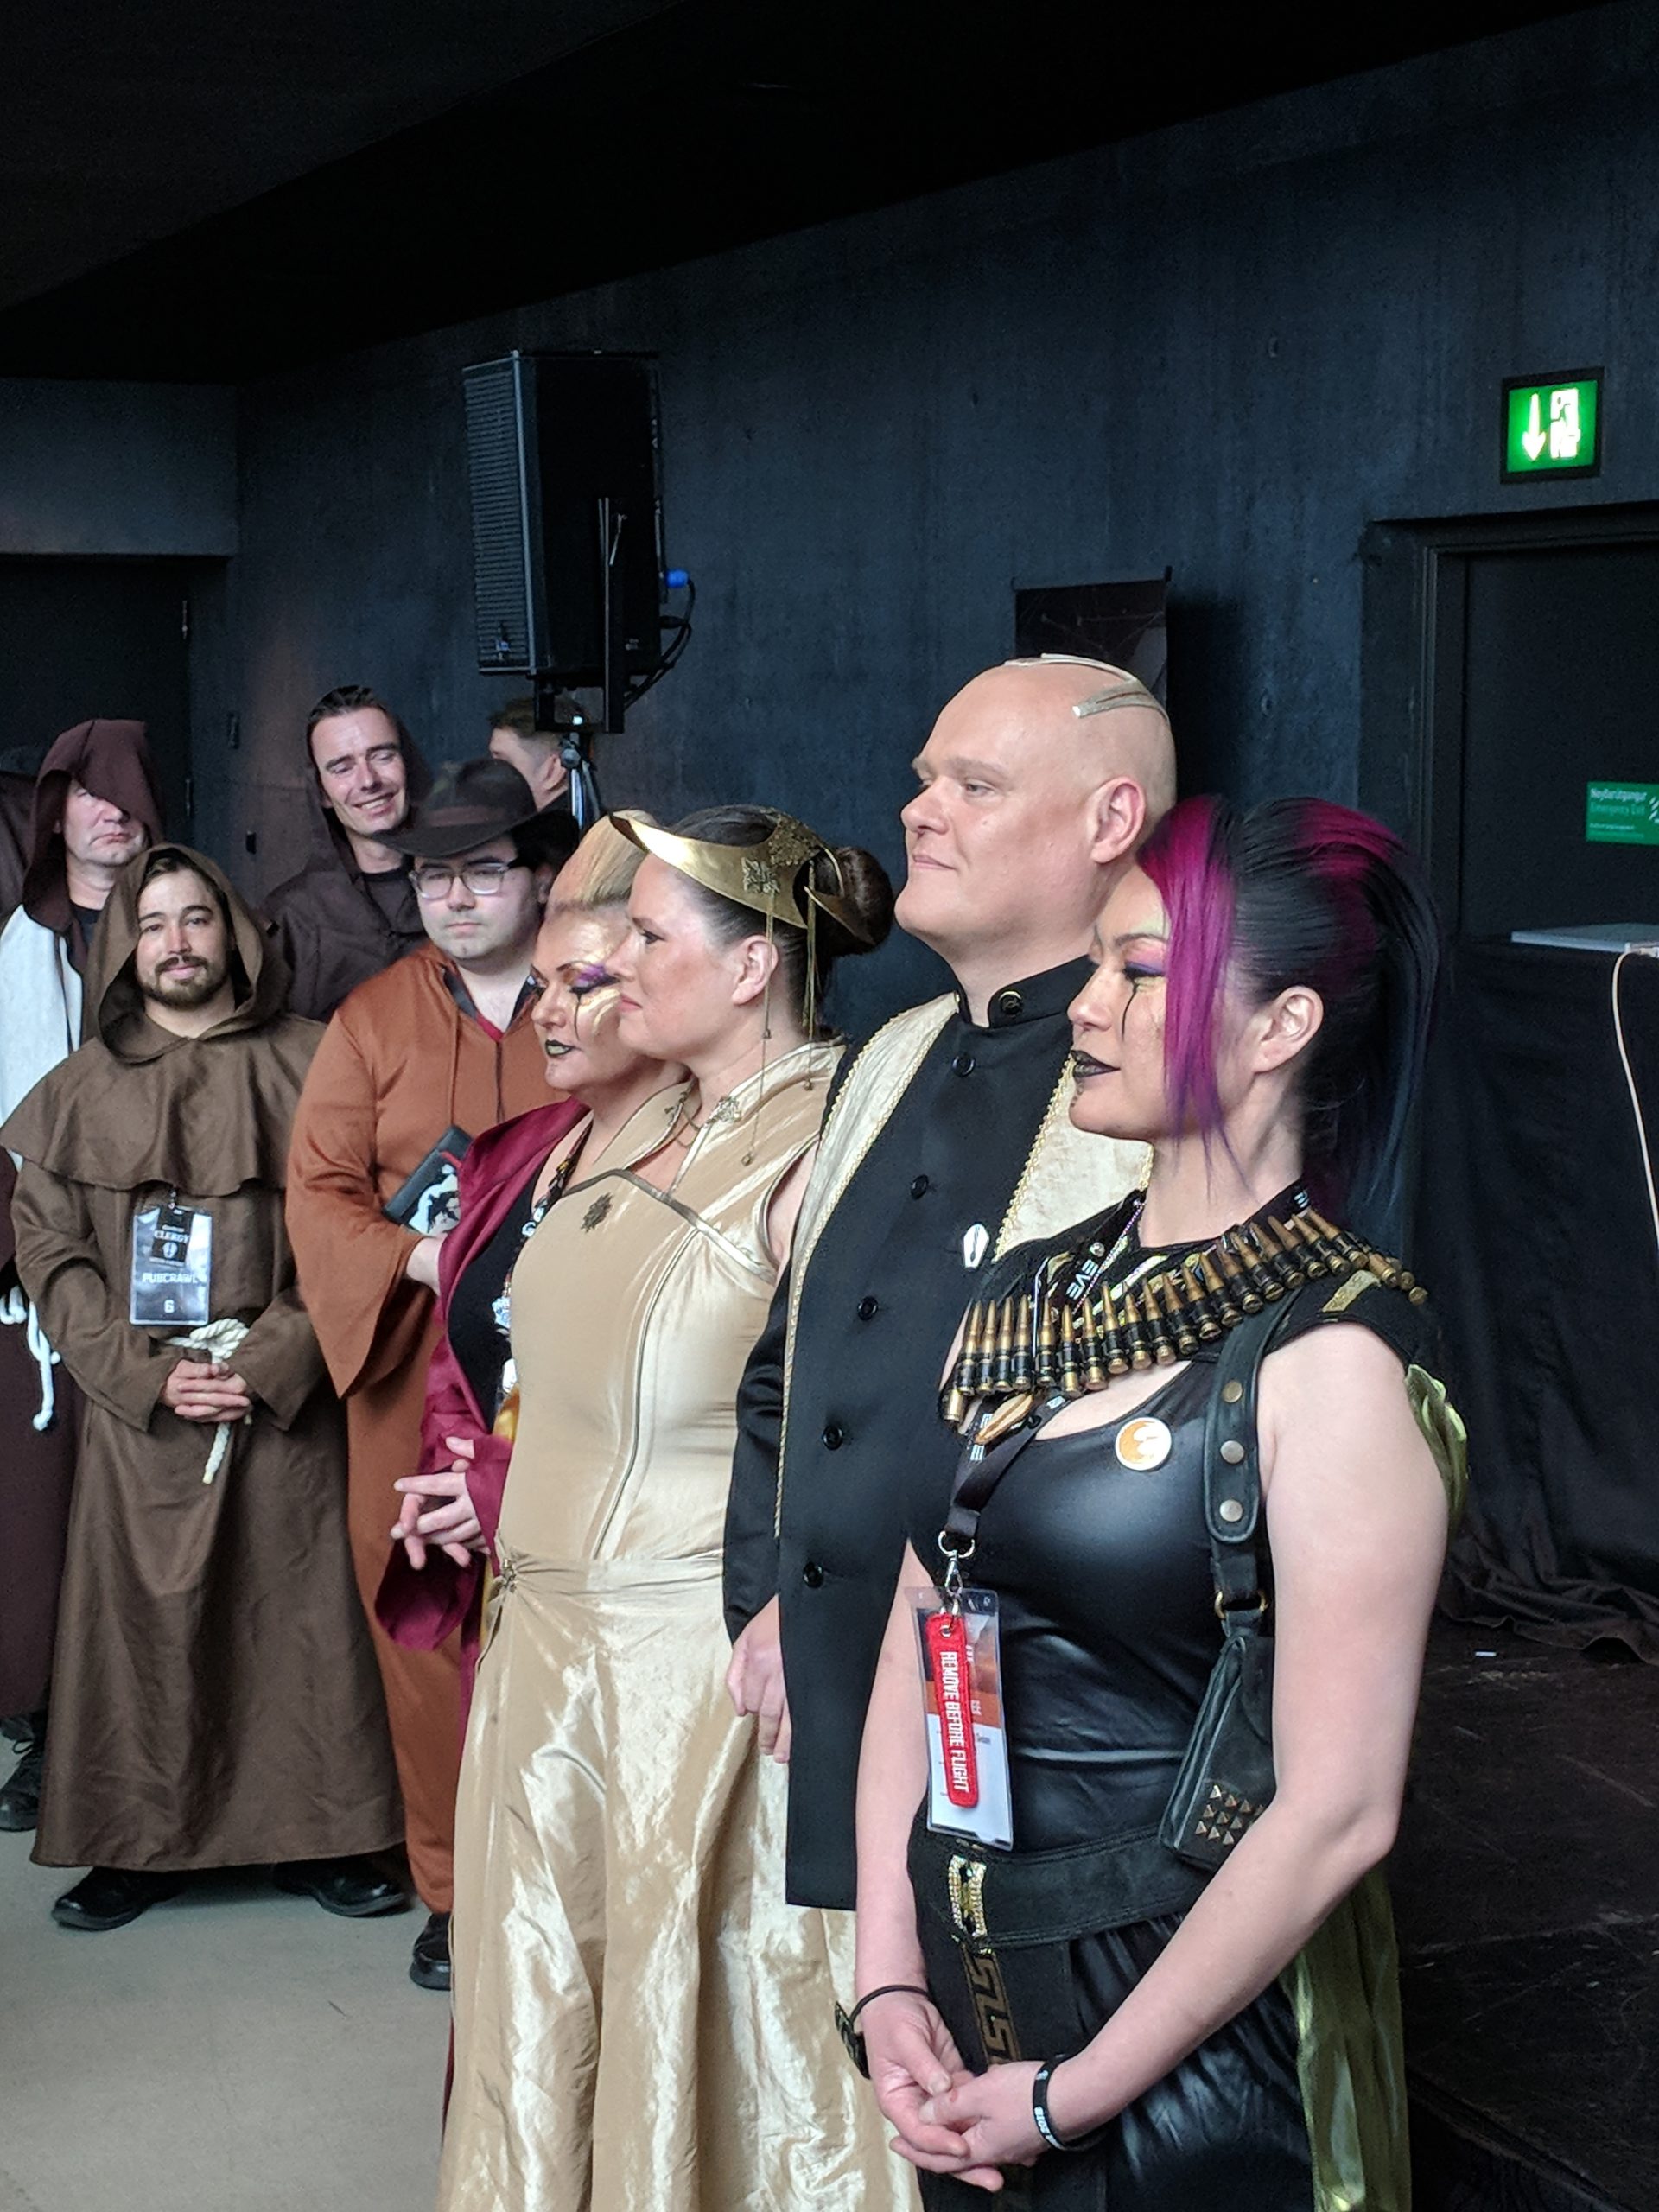 ‘Space Pope’ Officiates Wedding At EVE Fanfest